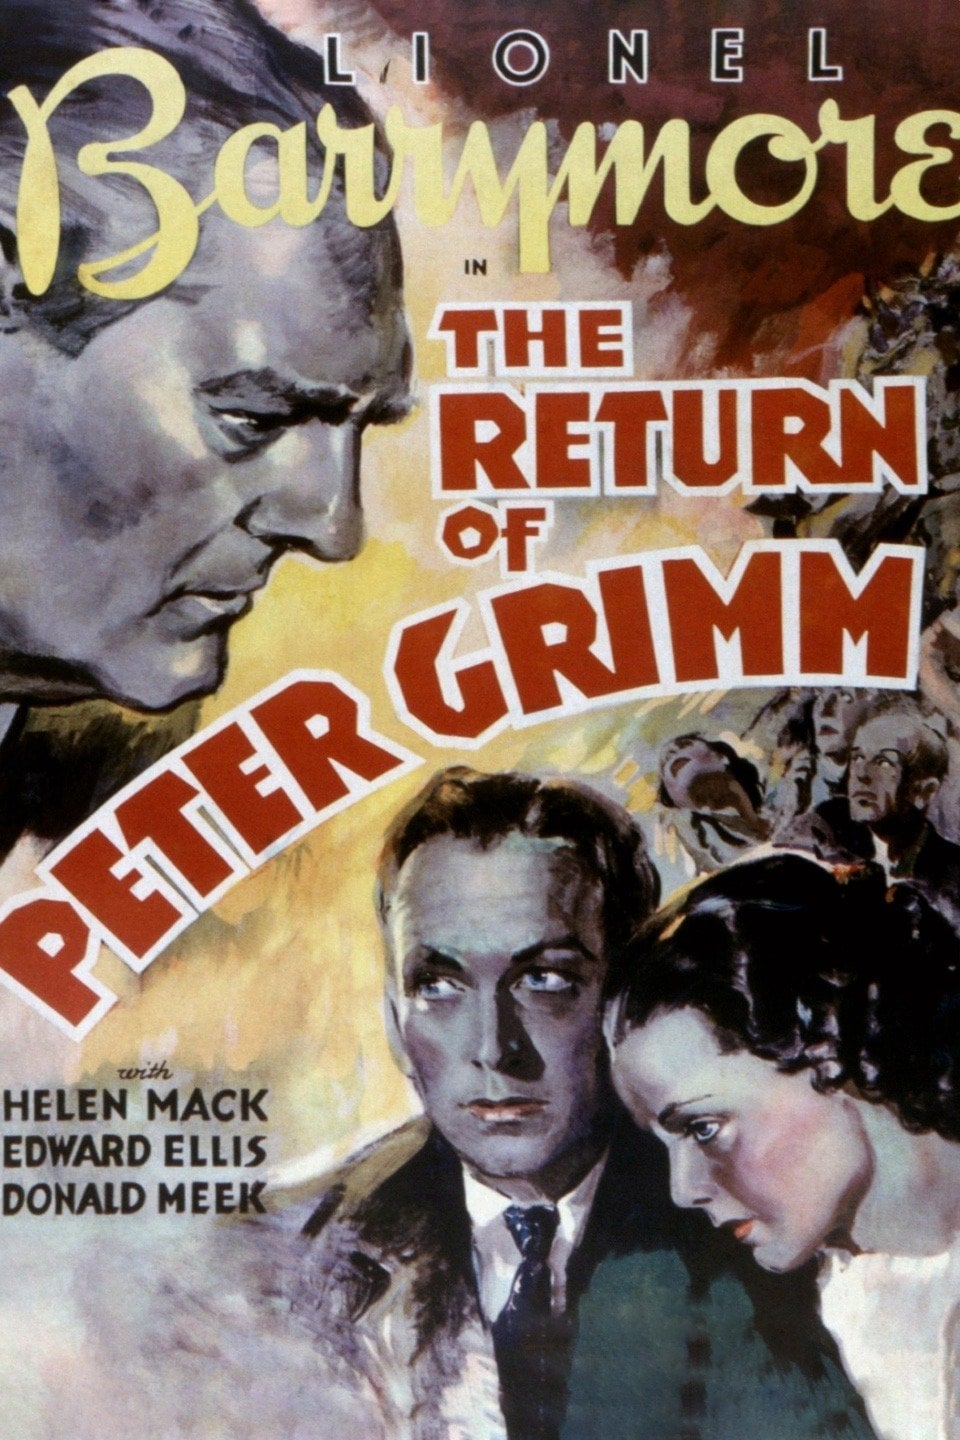 The Return Of Peter Grimm